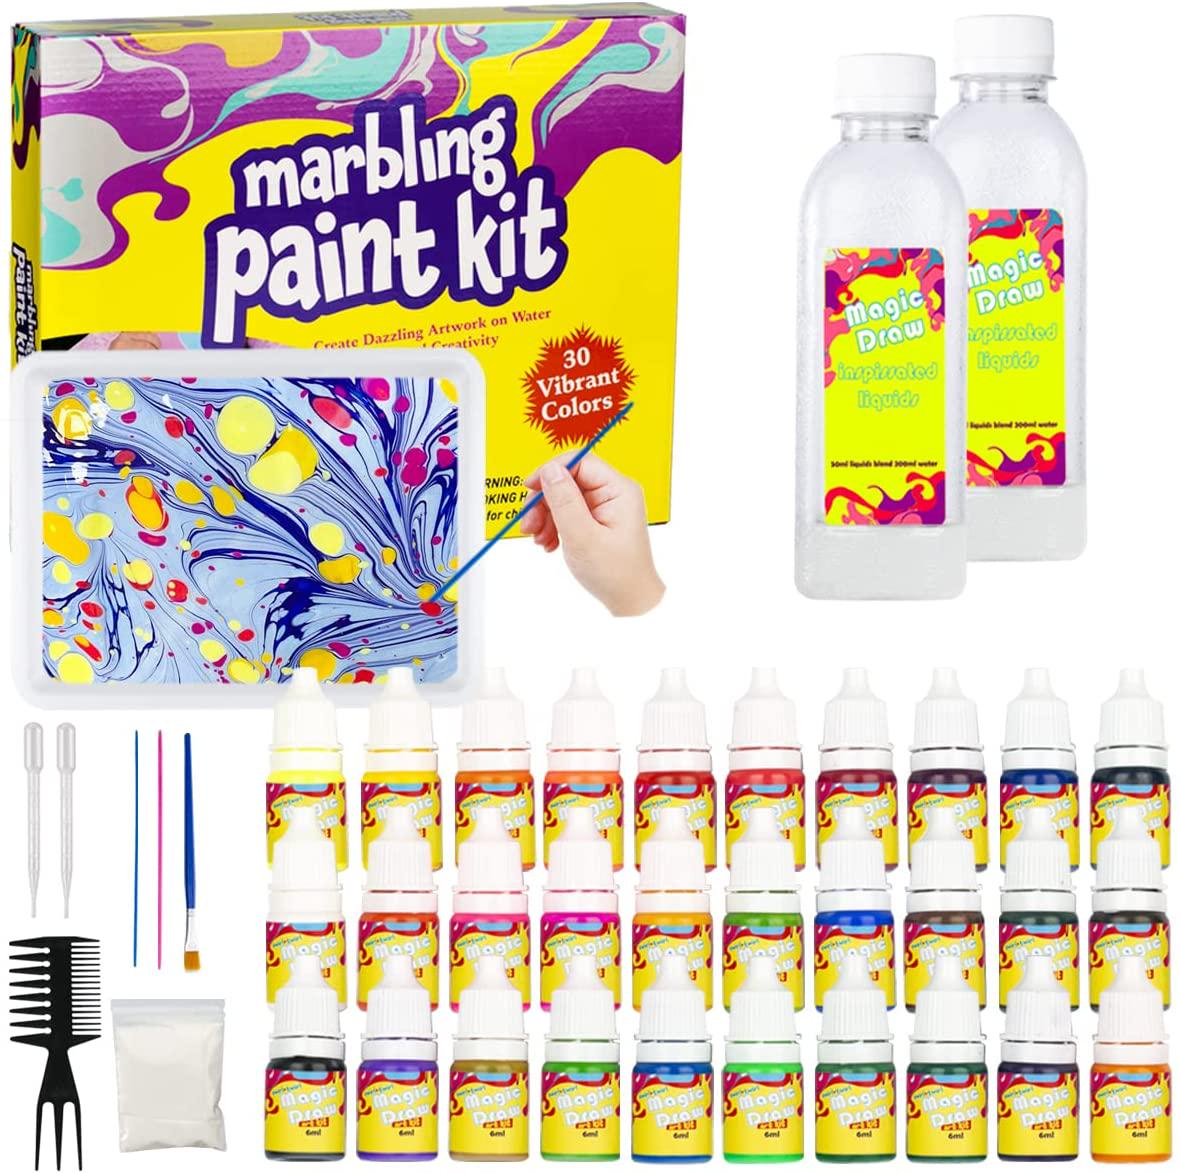 BROSUPER, Marbling Paint Kit for Kids, Water Marbling Paint Set, ArtsÂ andÂ CraftsÂ forÂ Girls and Boys Ages 6-12, 30 Colors, Ideas for Kids Activities Age 4 5 6 7 8 9 10 Marble Painting